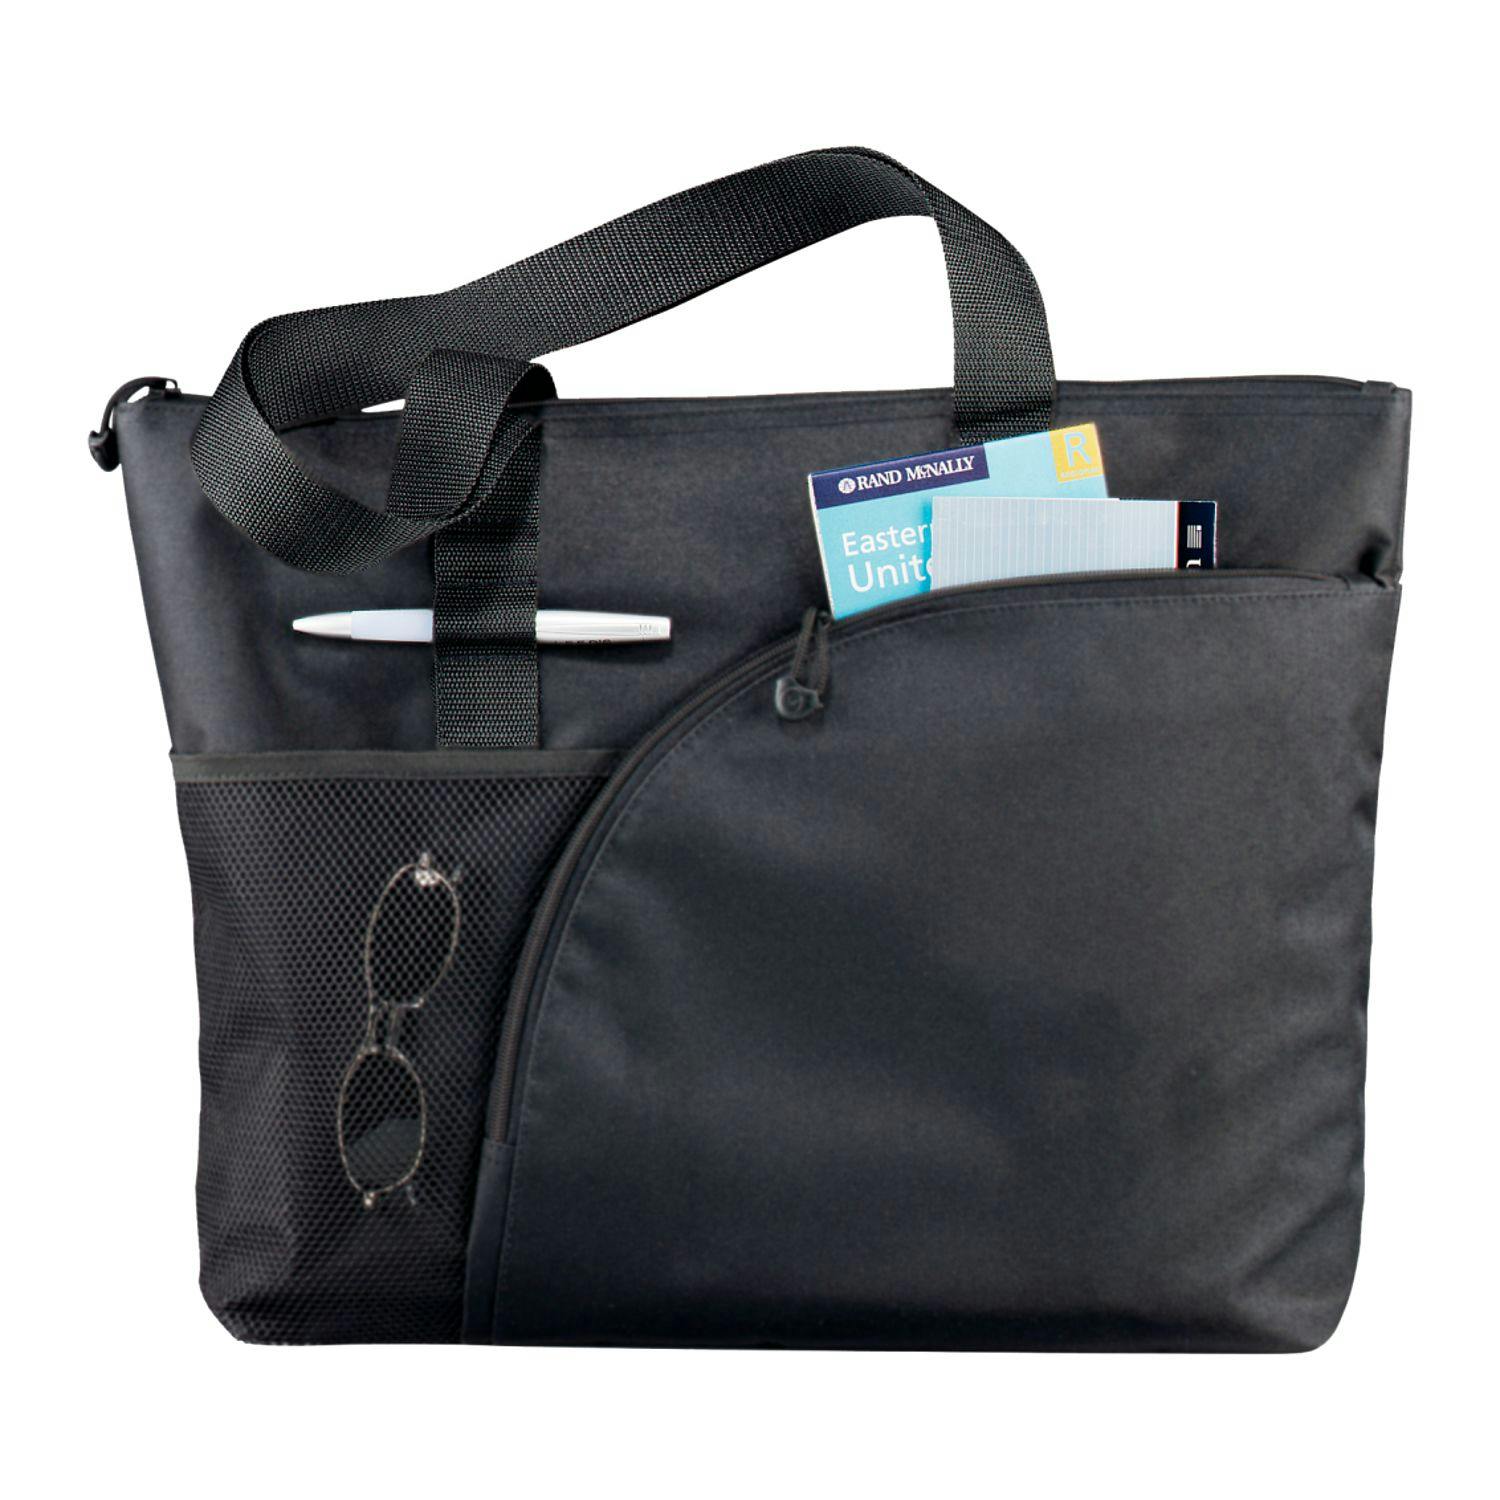 Excel Sport Zippered Utility Business Tote - additional Image 1